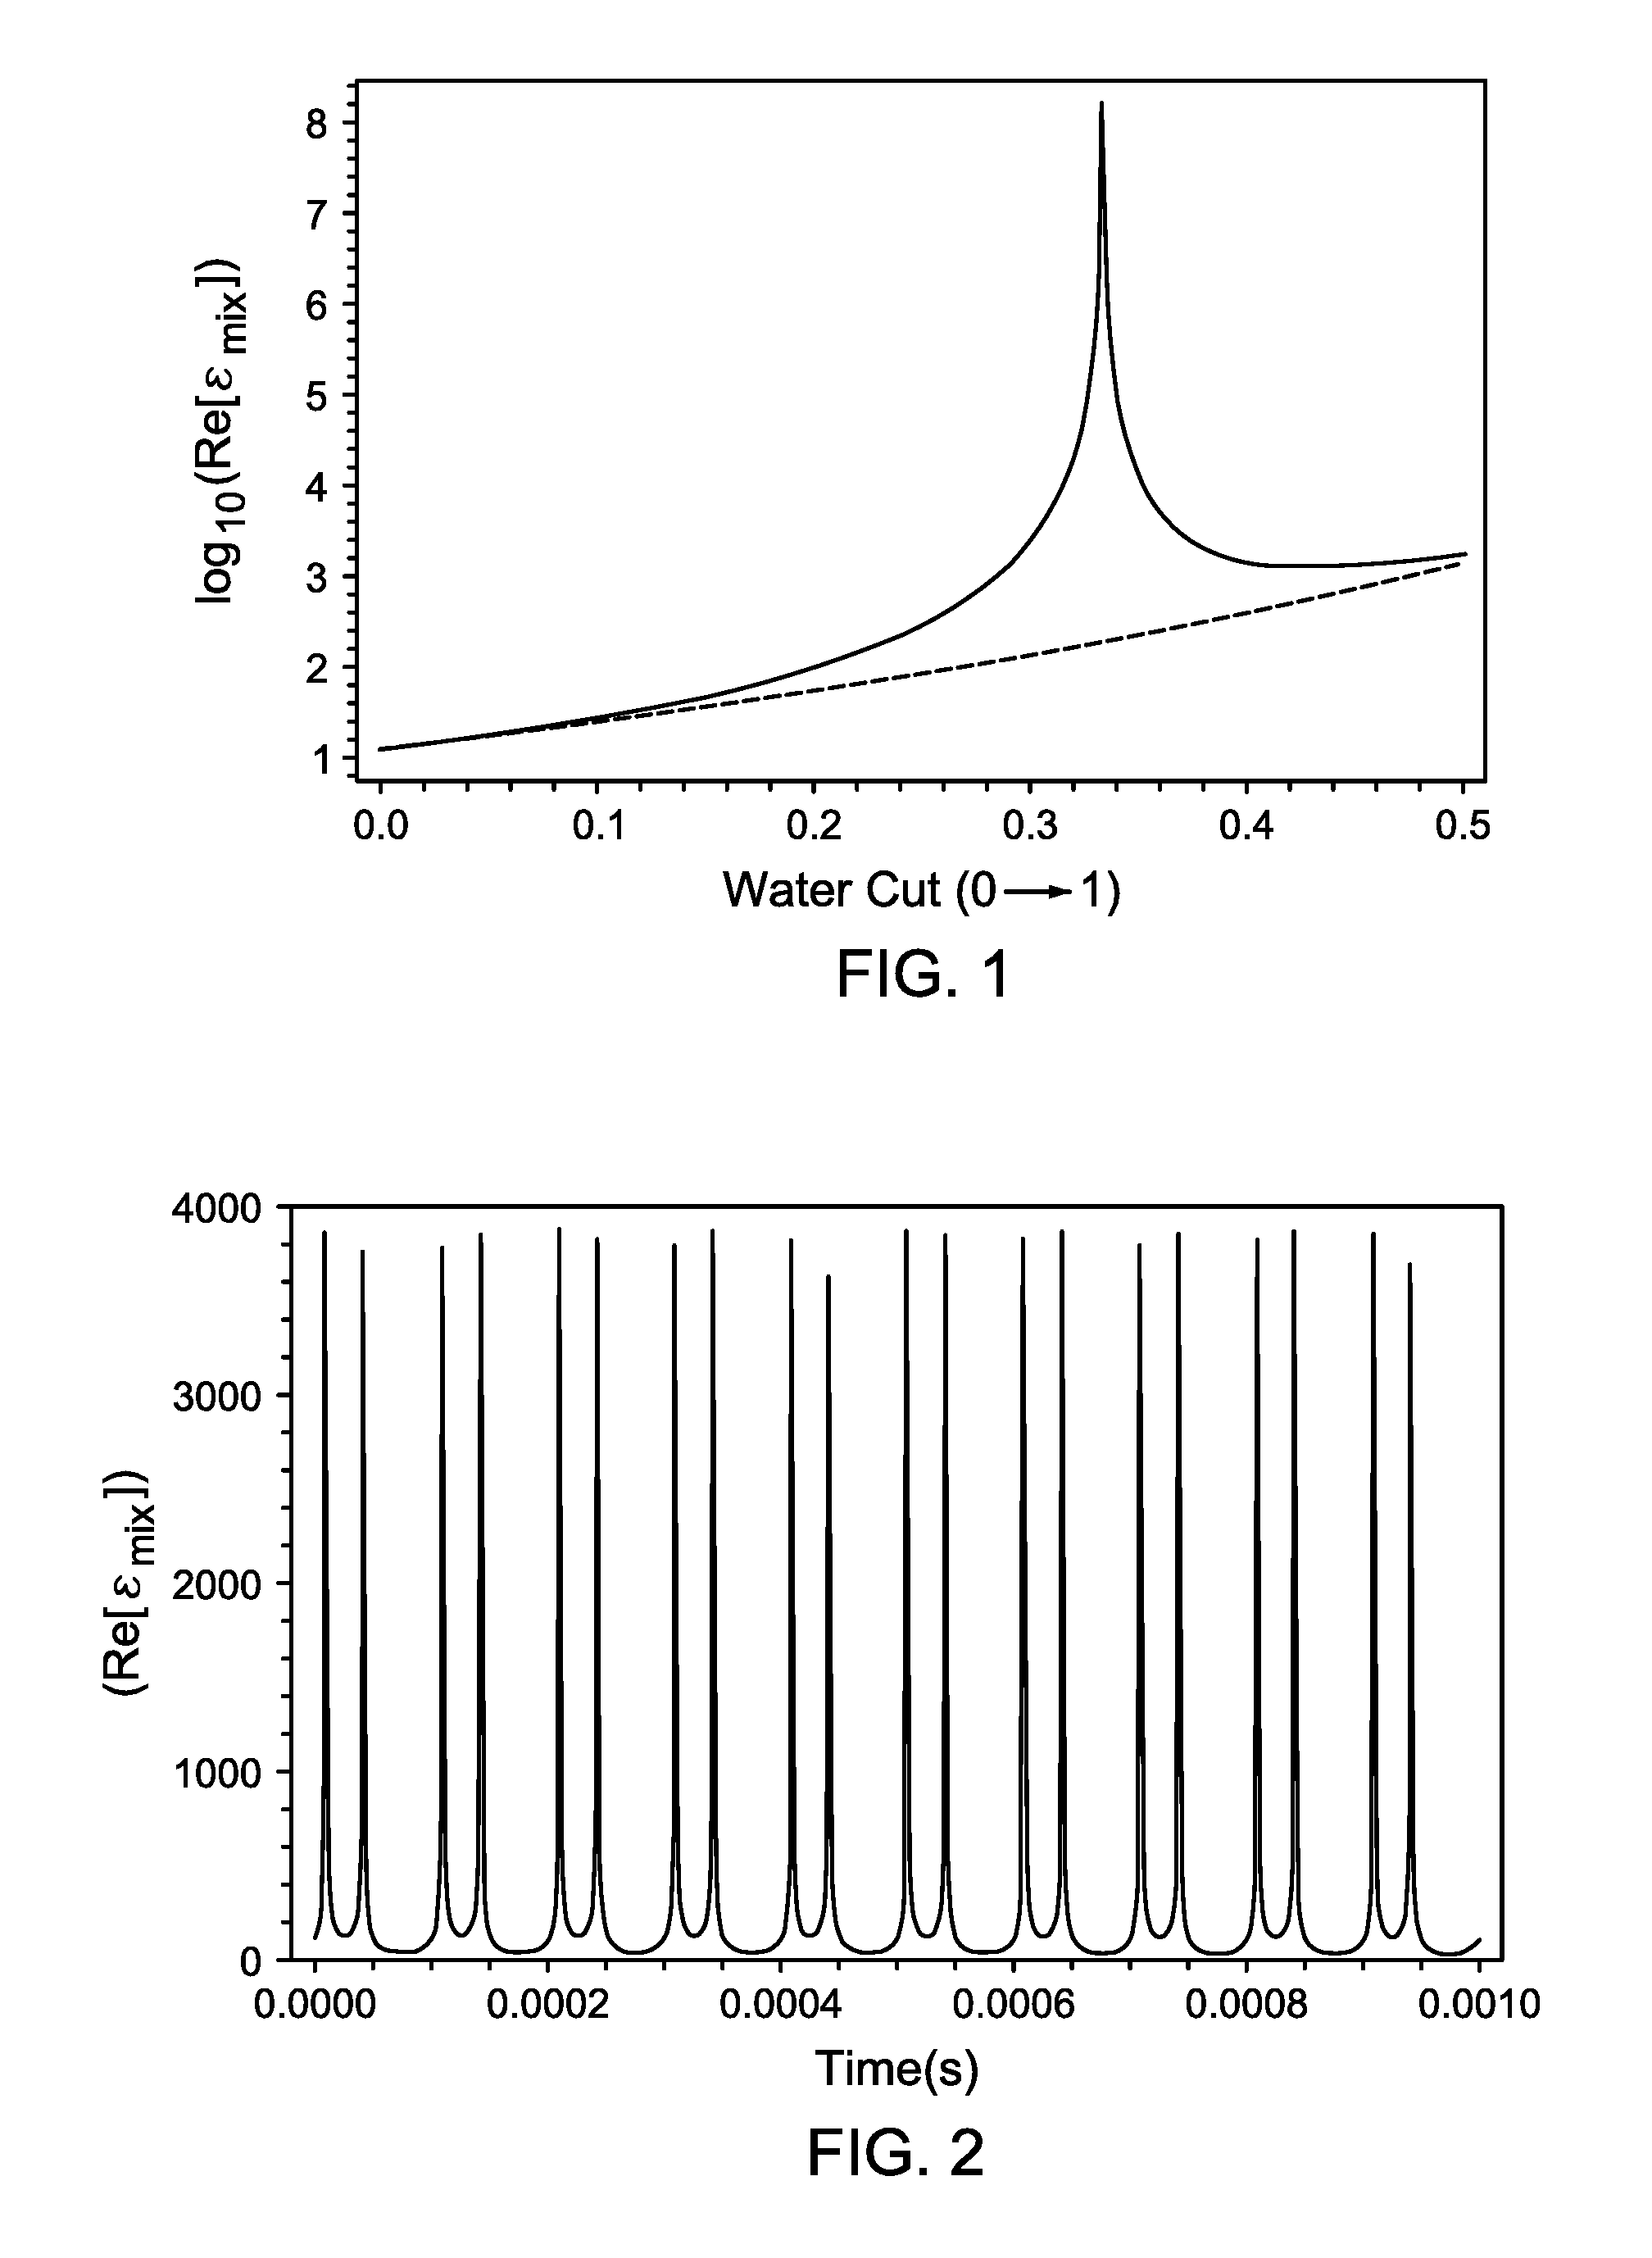 Method for Non-Linear High Salinity Water Cut Measurements